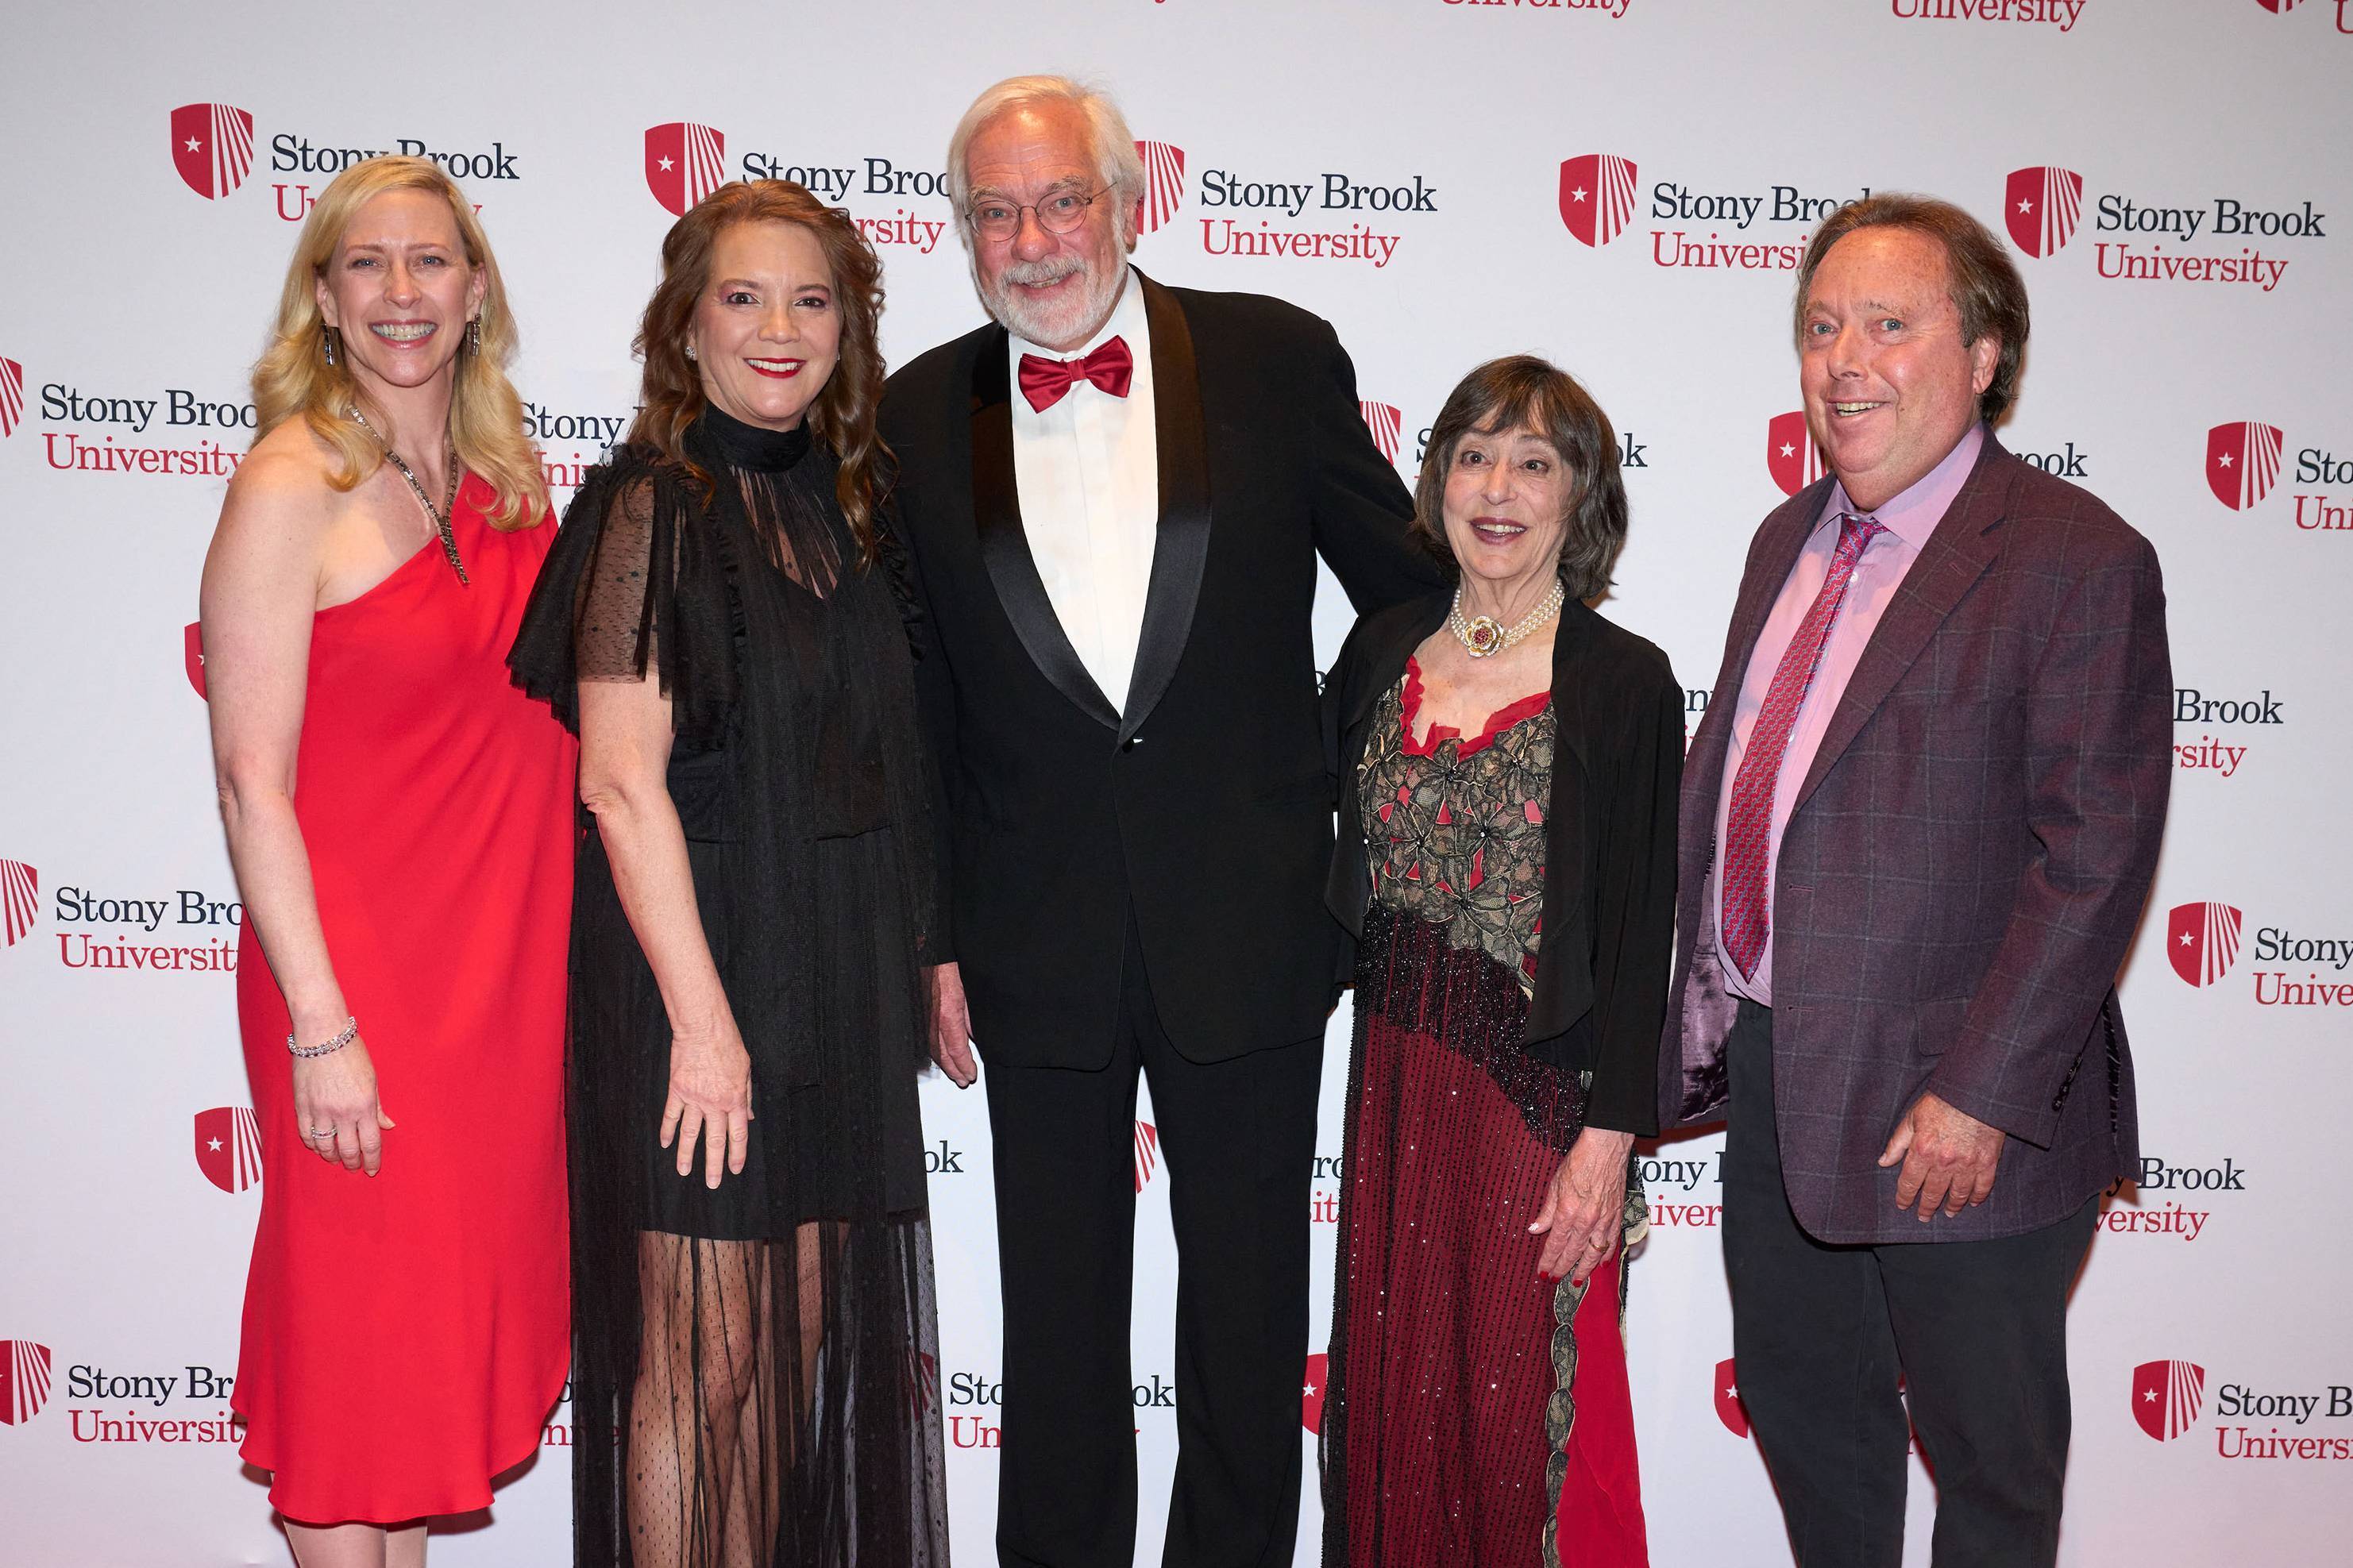 From left to right: Stony Brook University President Maurie McInnis, Peggy Gelfond, honorees Robert J. Maze and Laurie Landeau, and Rich Gelfond, Stony Brook Foundation chair and CEO of Imax Corporation.